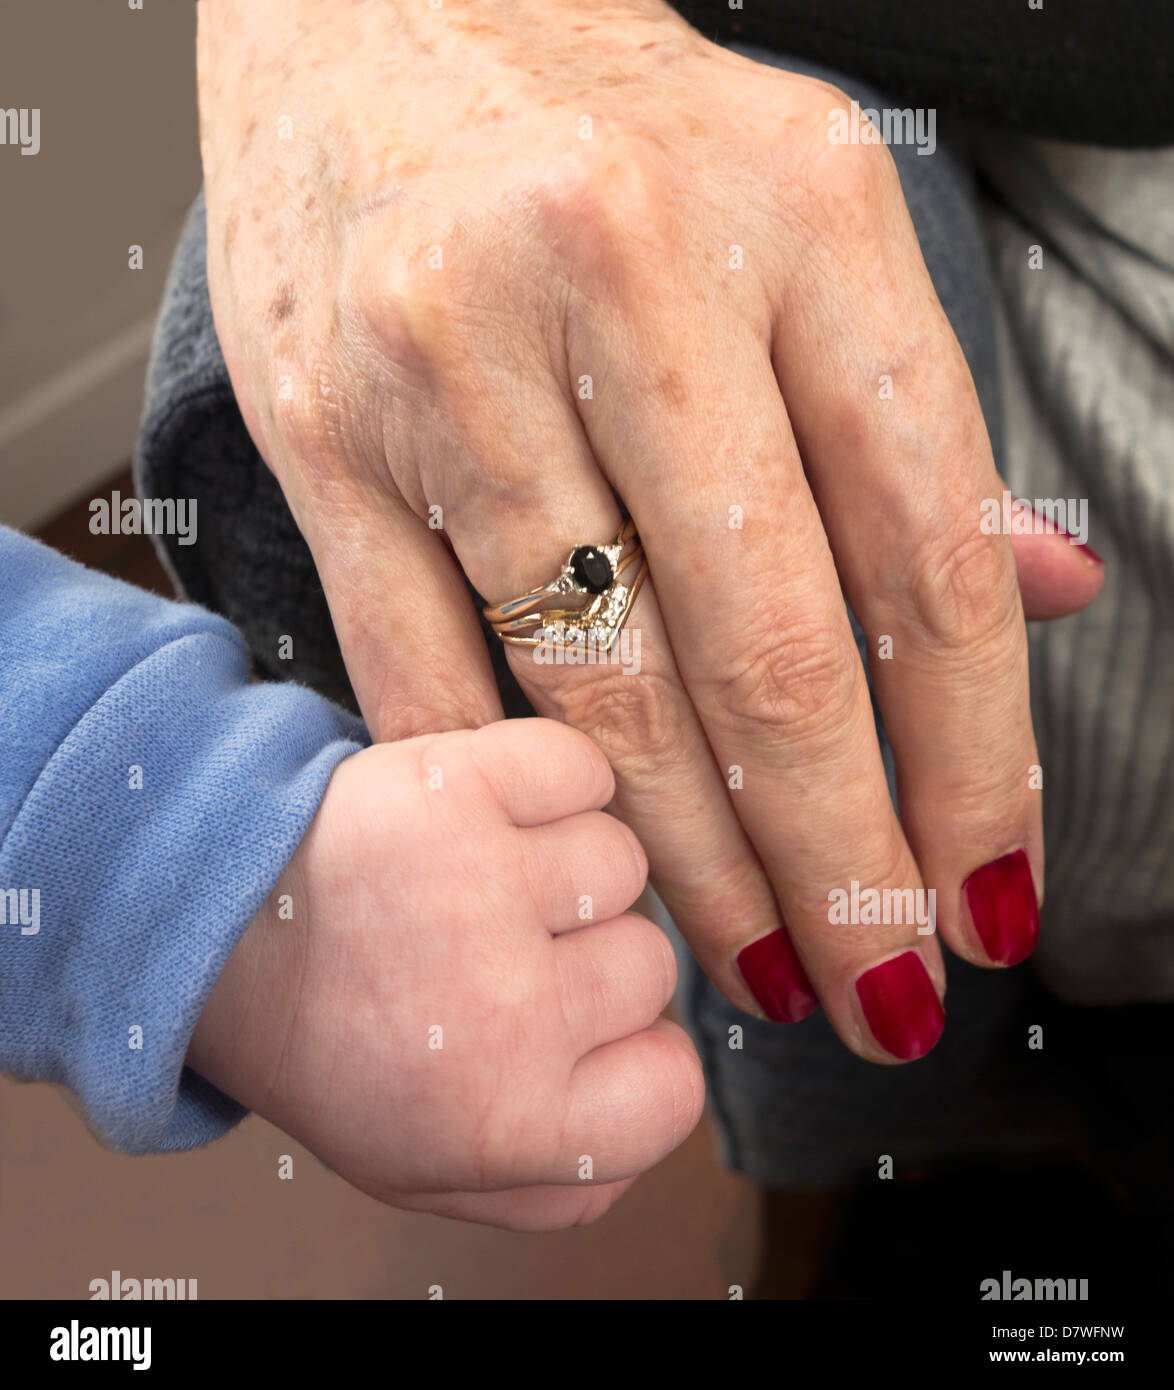 A baby's hand clutching an older woman's little finger Stock Photo